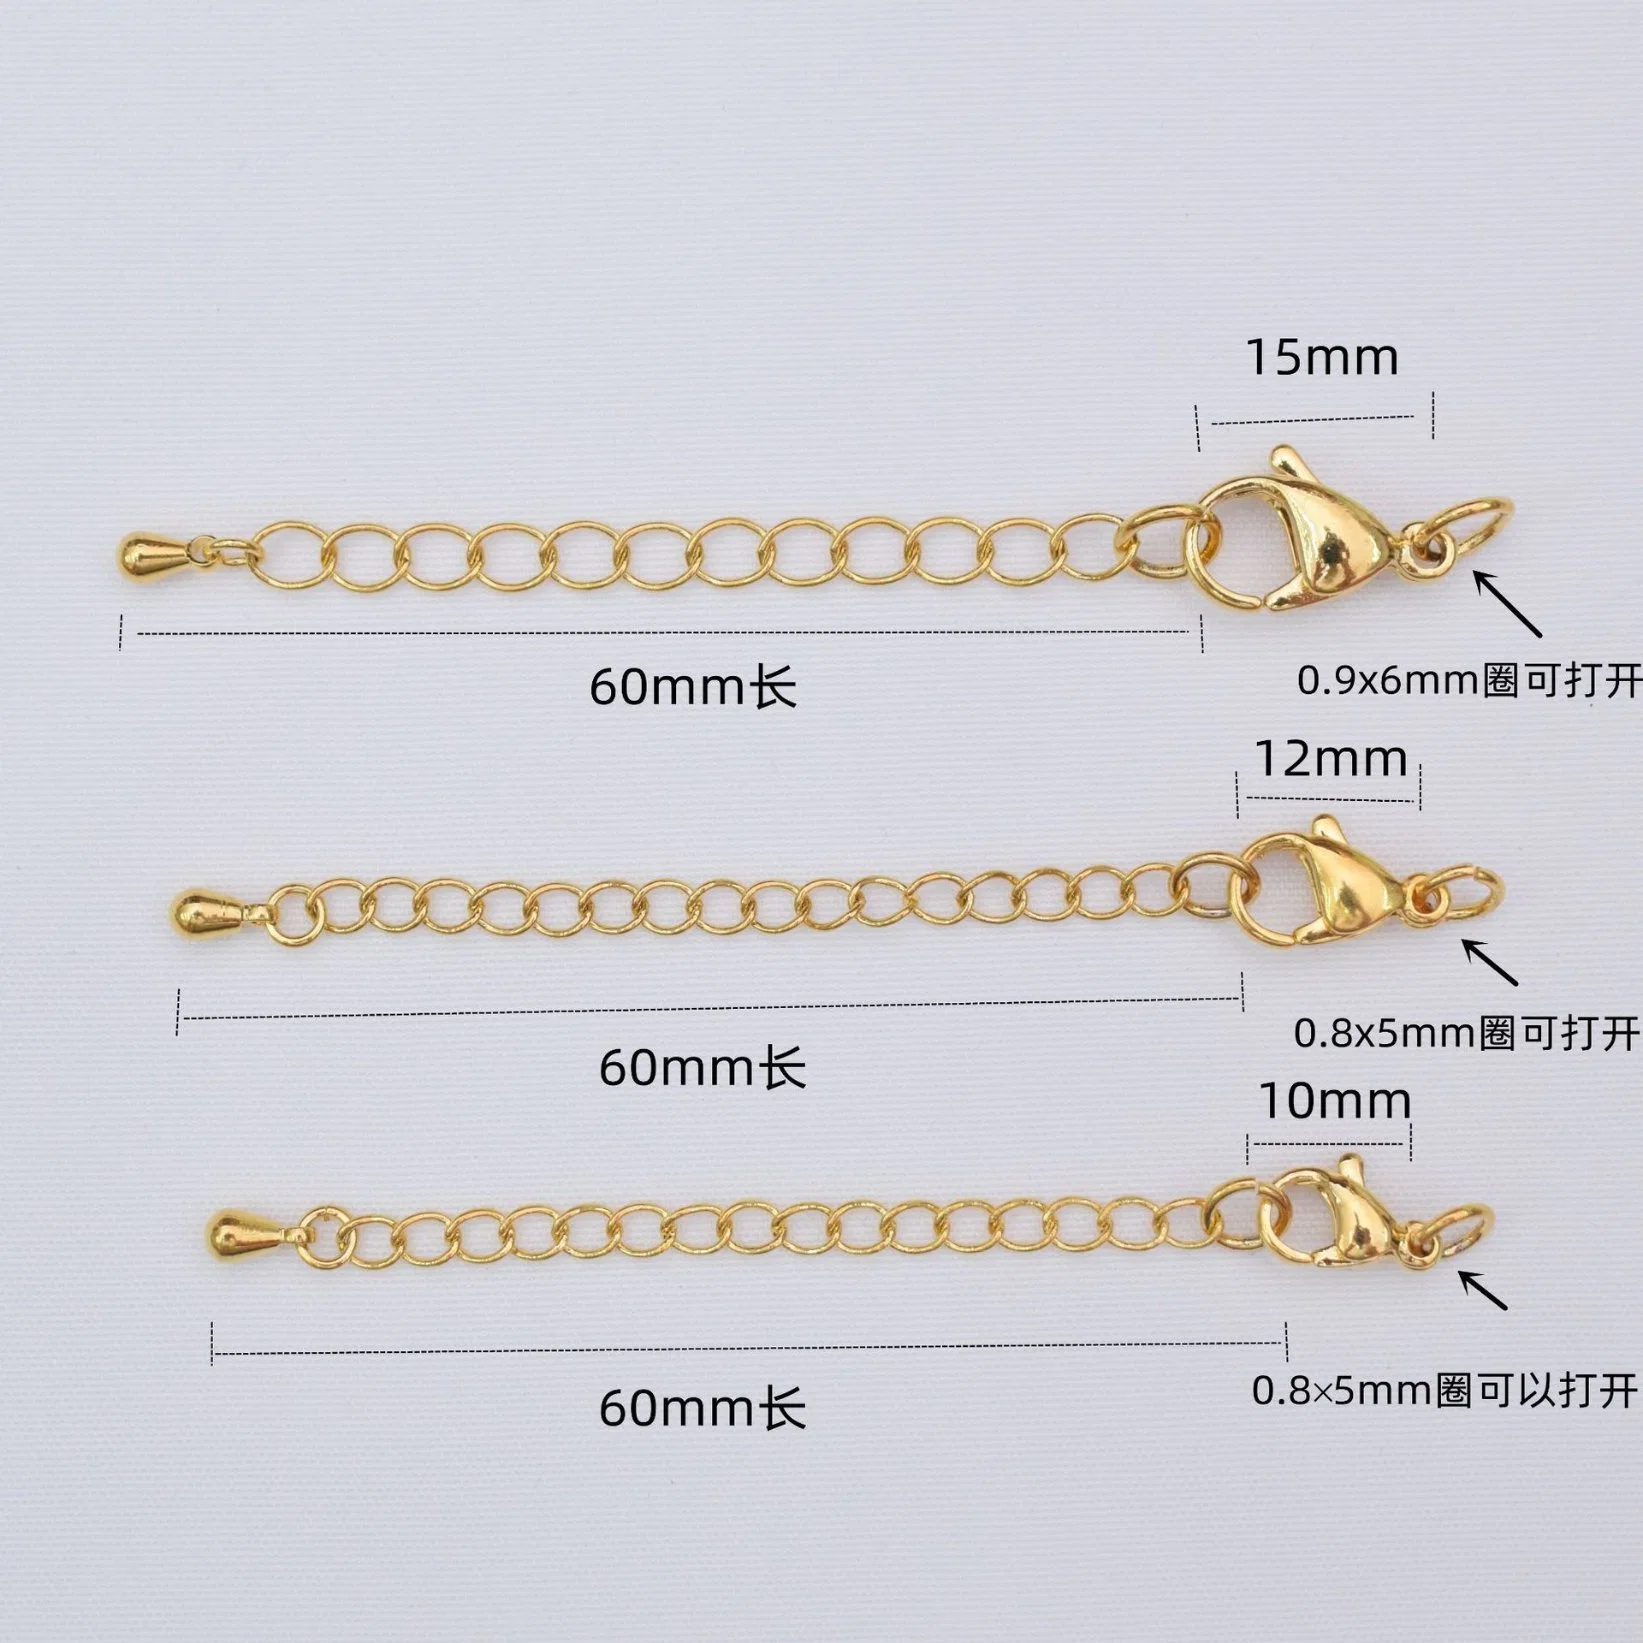 Lobster Buckle Tail Chain Adjustment Chain DIY Accessories Necklace Bracelet